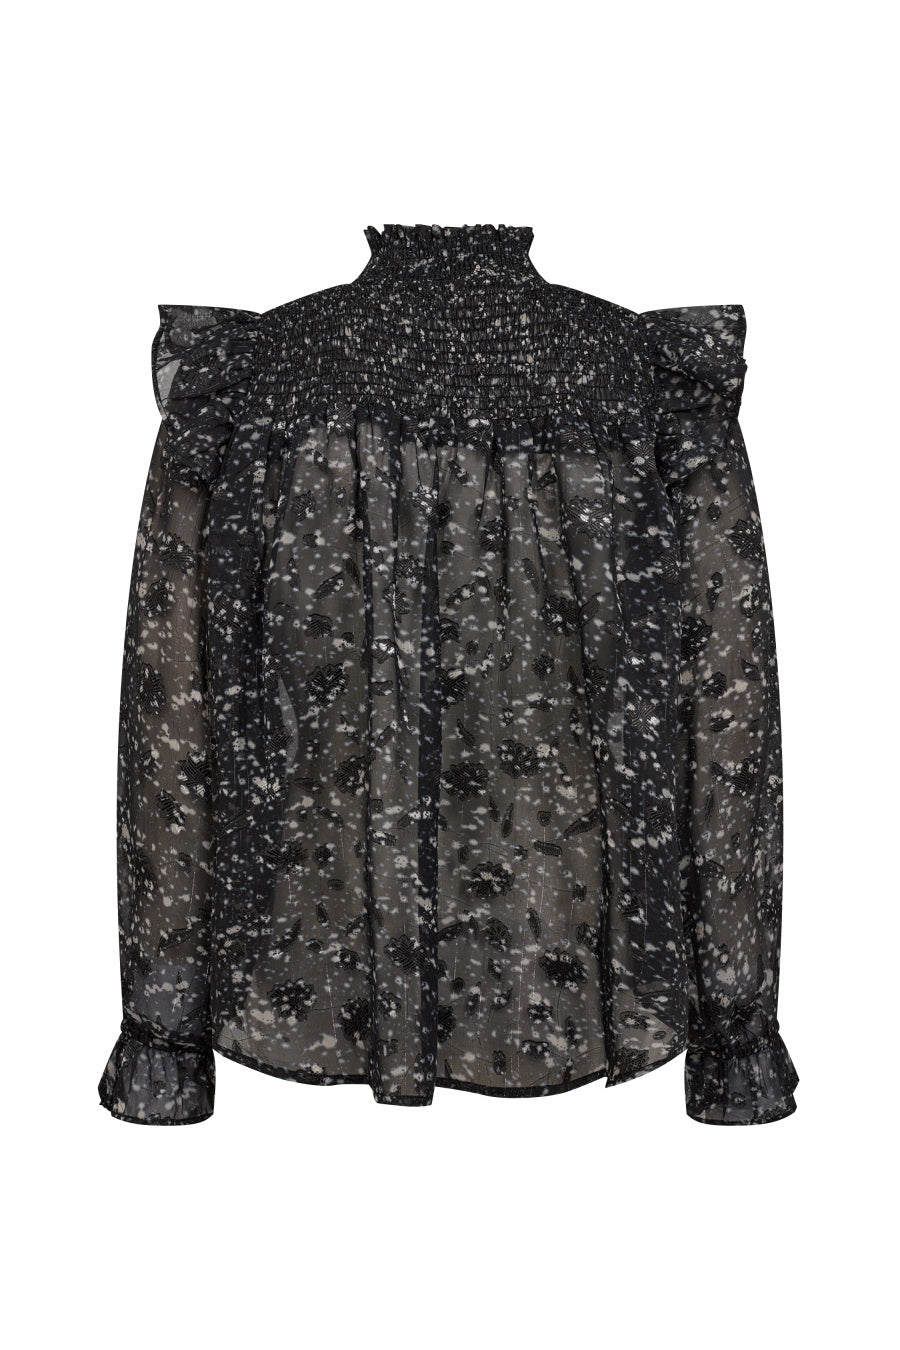 Co'Couture Snowdrift Smock Blouse - Black - RUM Amsterdam